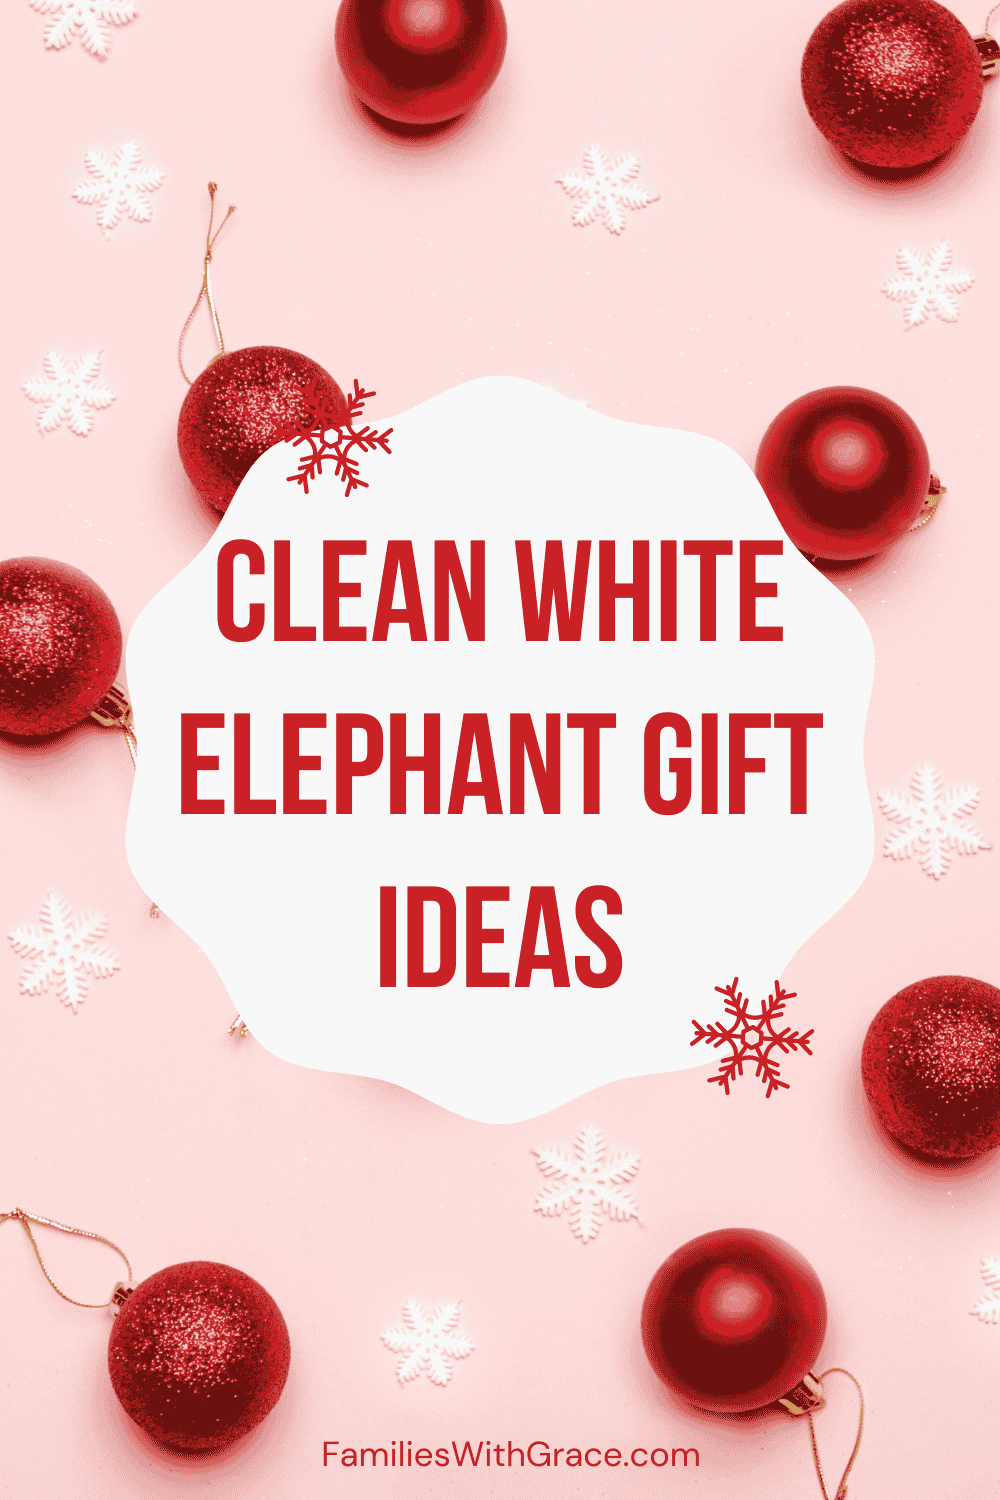 Gag gift ideas that are clean and fun